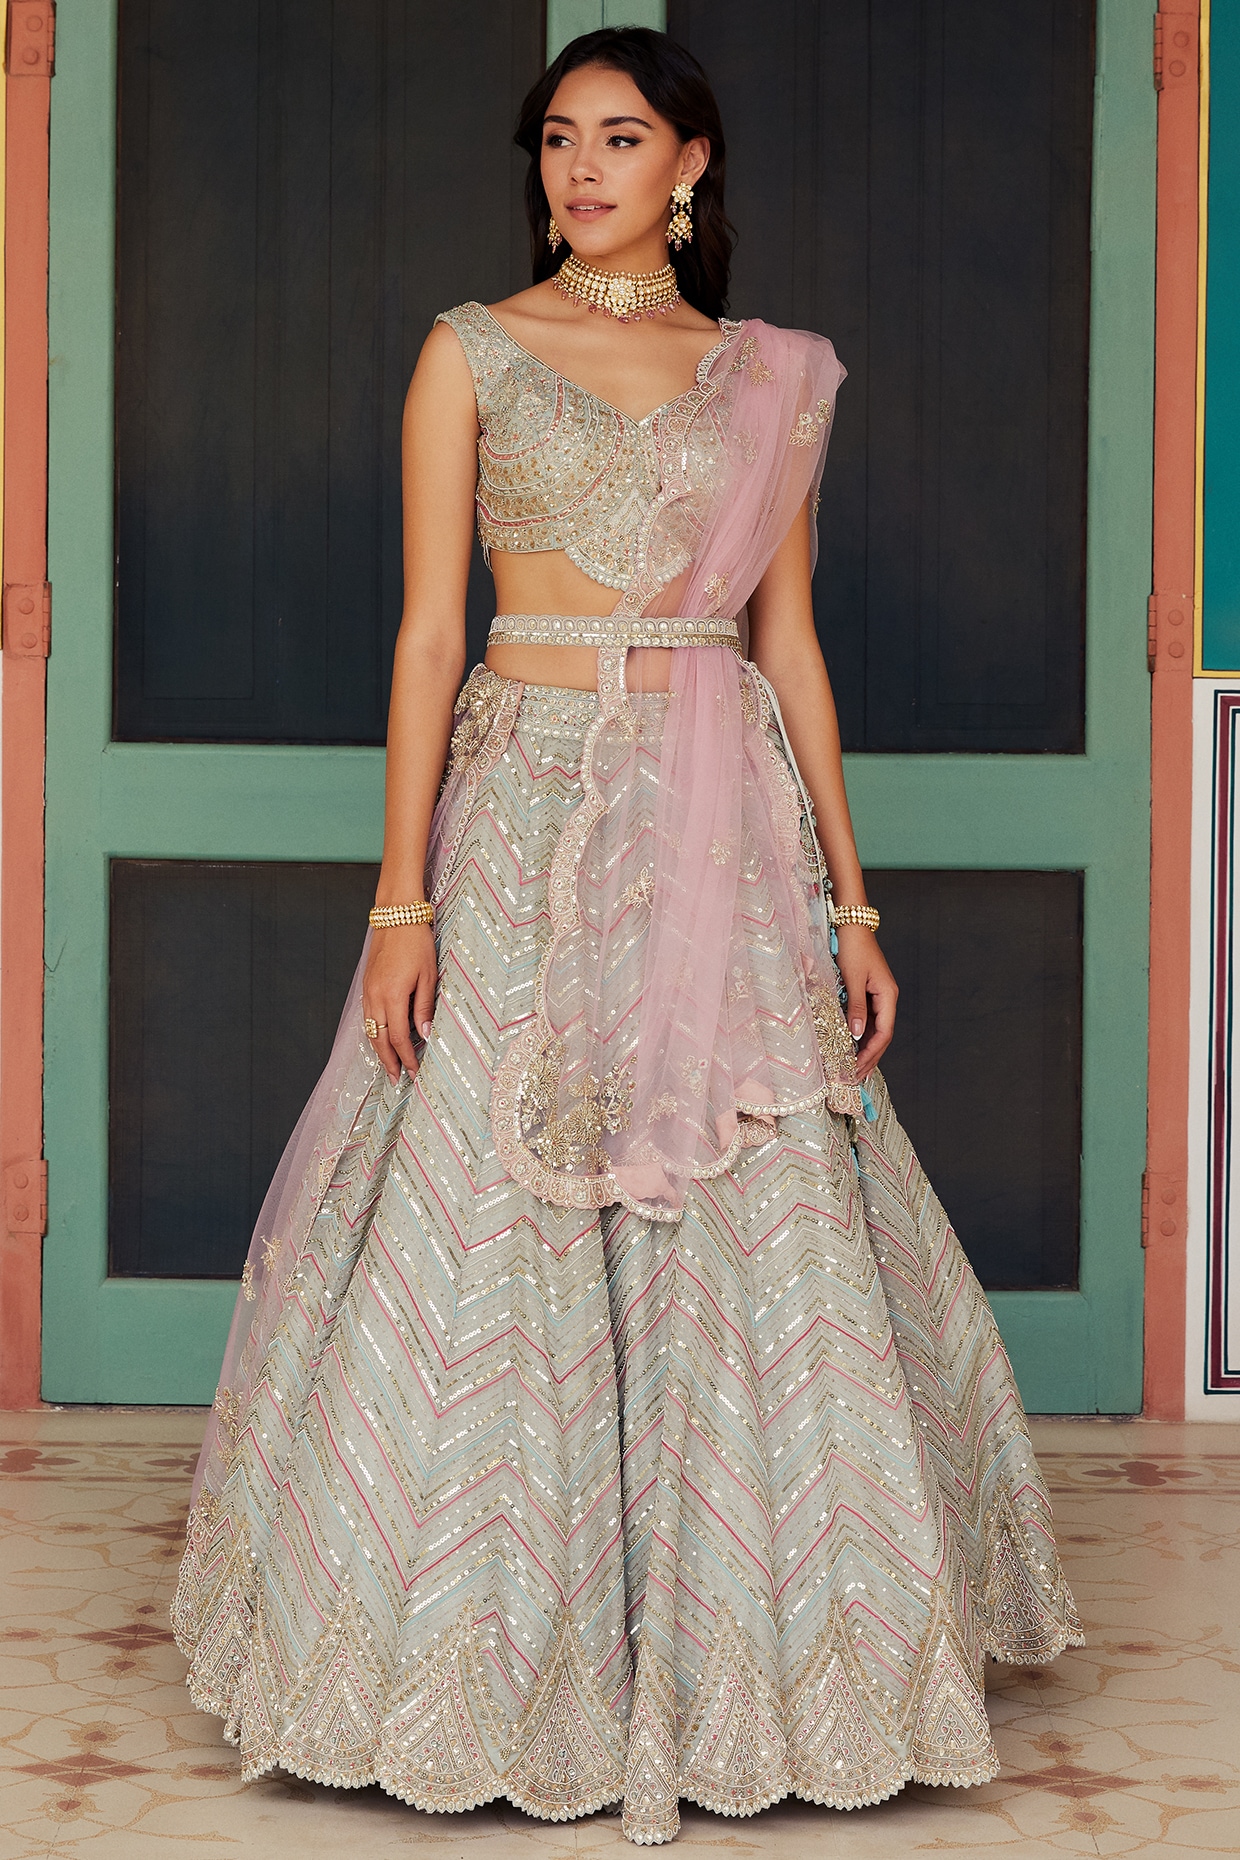 15 Stunning Engagement Dress For Indian Bride Ideas To Look Breathtaking  For The Ceremony | Engagement dresses, Indian engagement dress, Indian  bridal dress